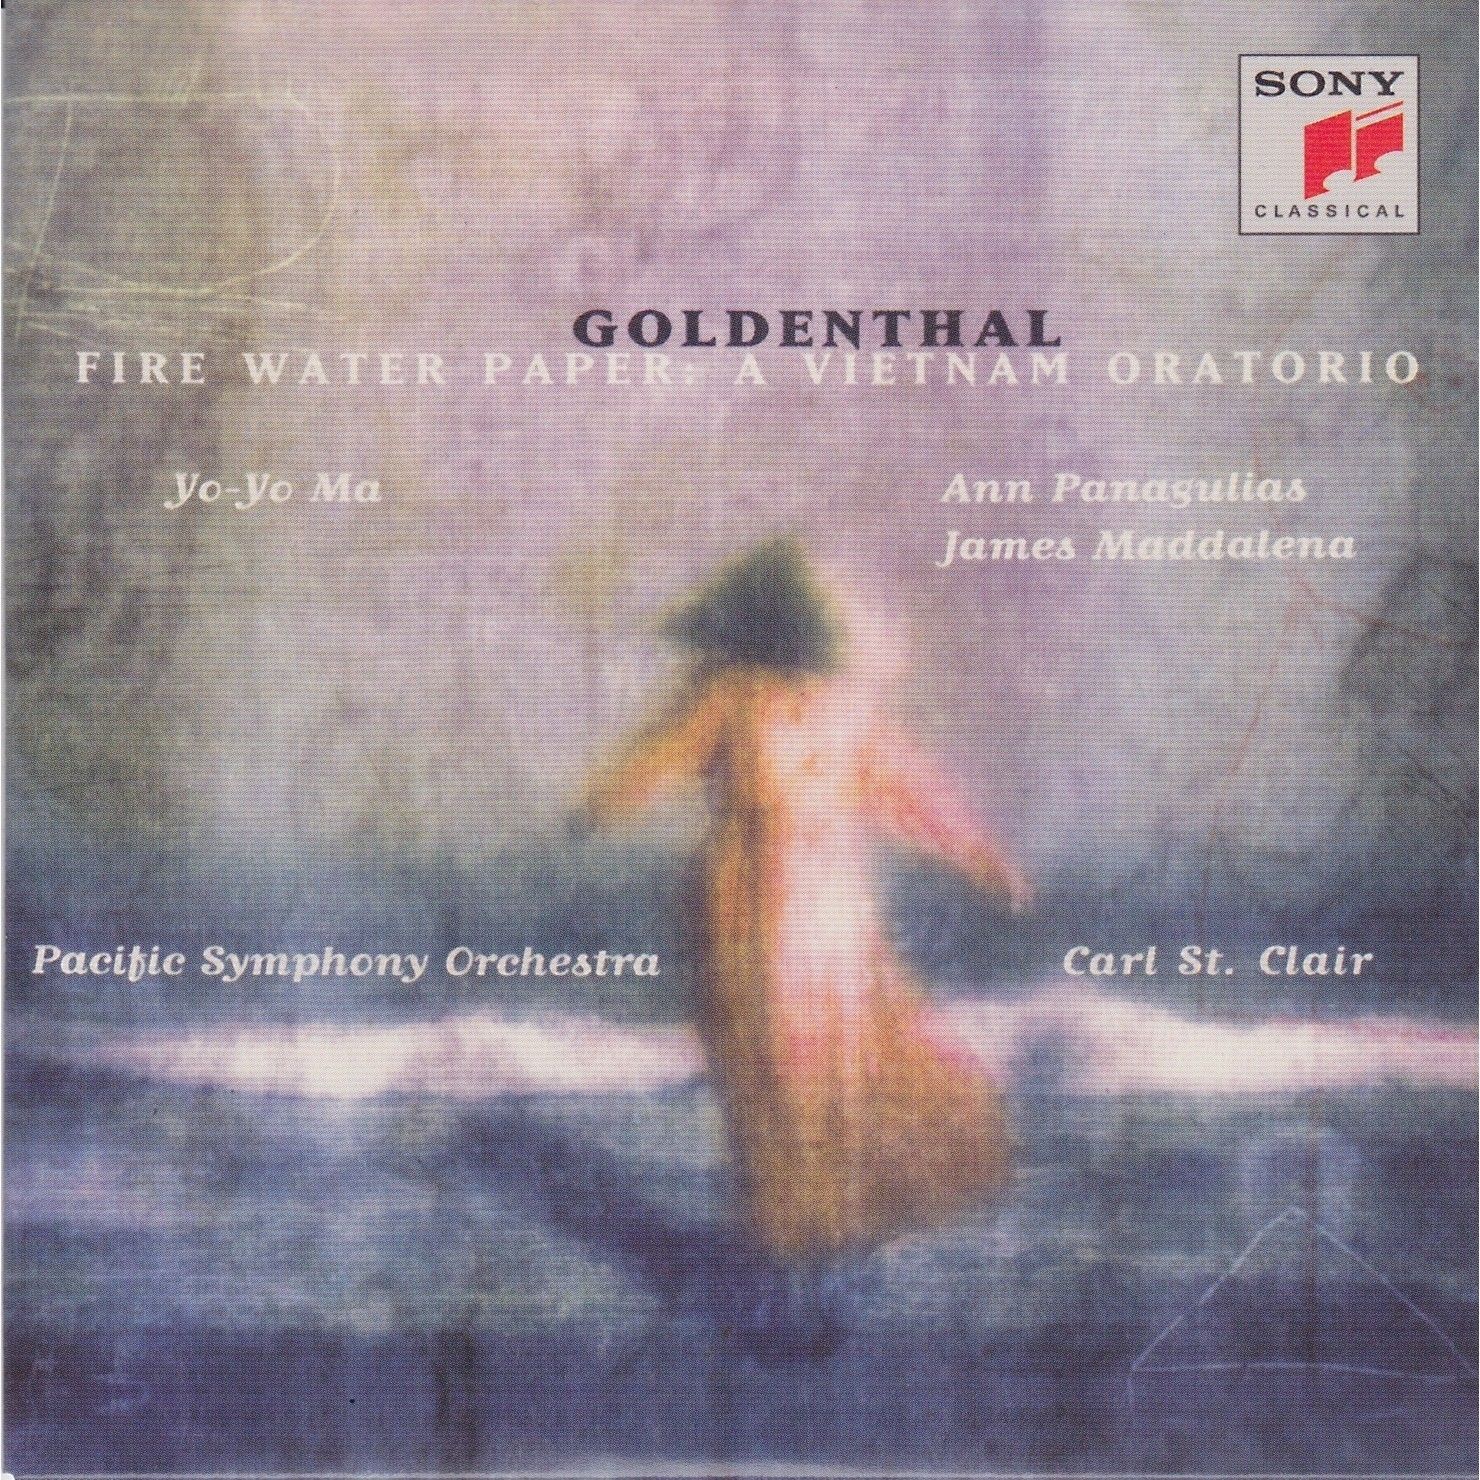 30-Years-Outside-Goldenthal-Fire-Water-Paper-A-Vietnam-Oratorio-cover.jpg